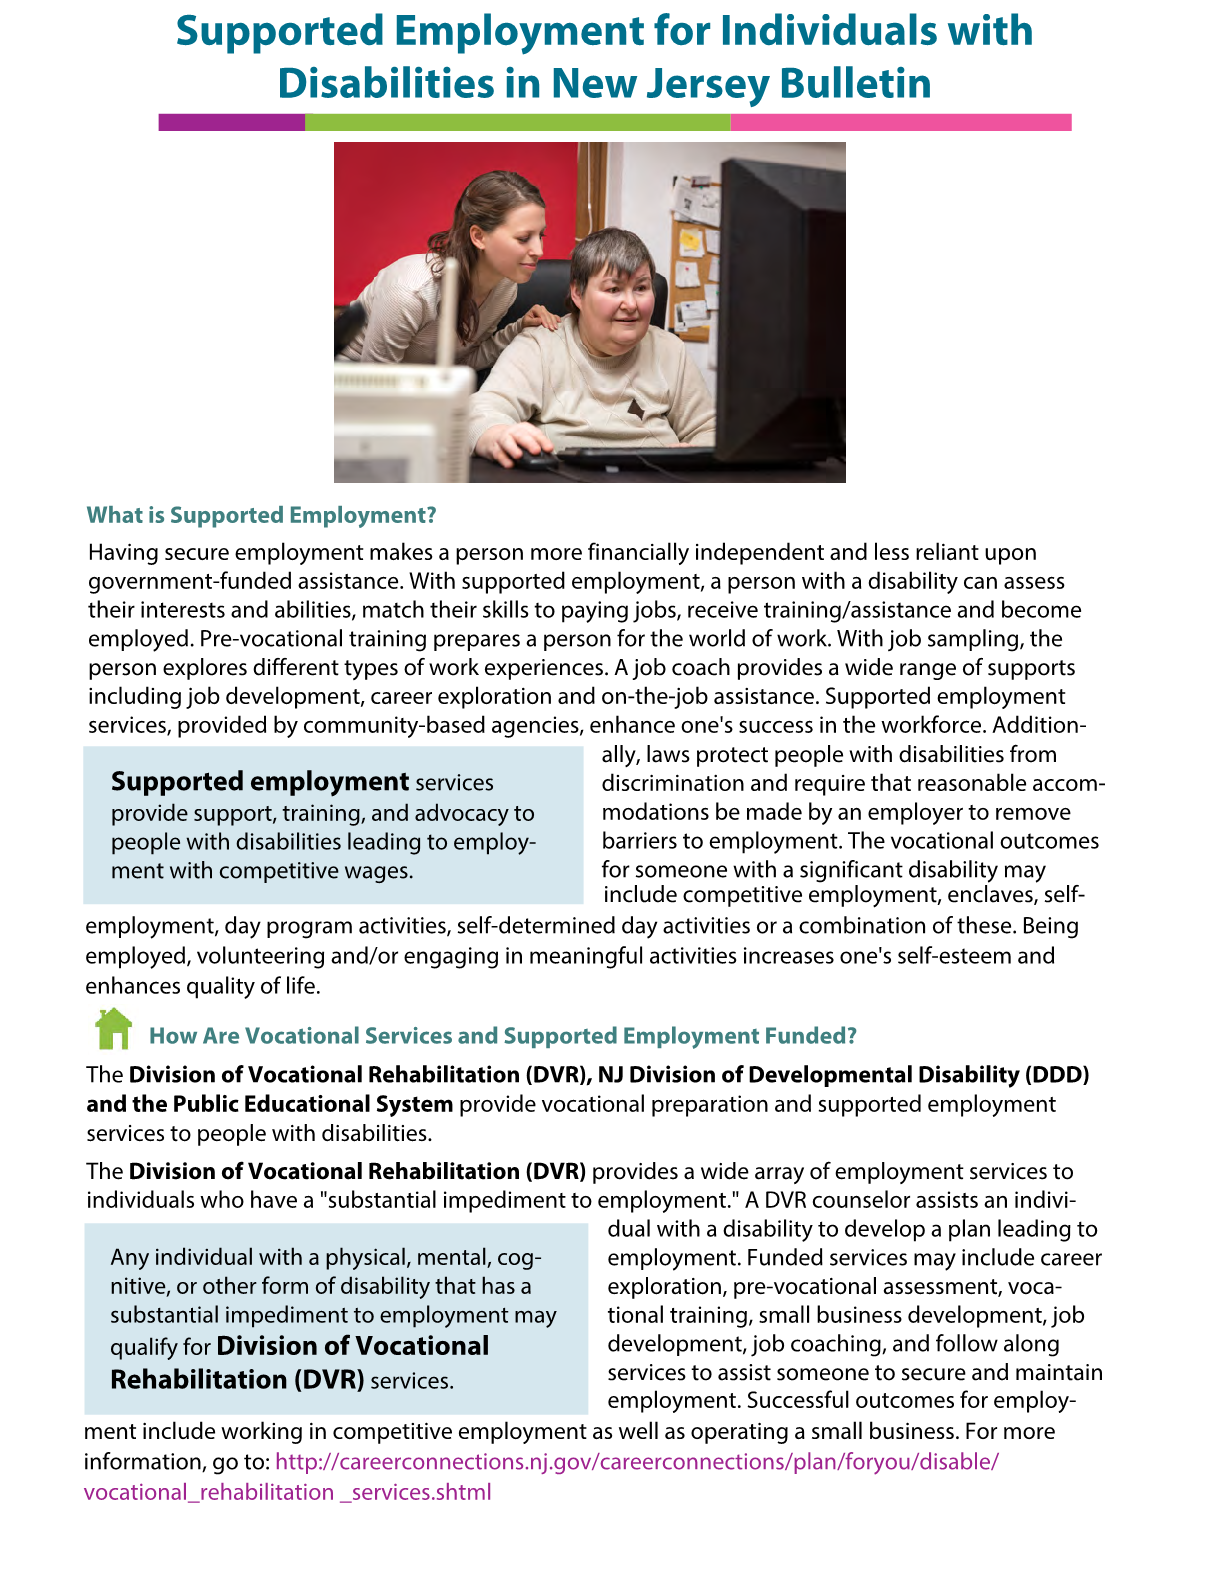 Supported Employment for Individuals with Disabilities in New Jersey